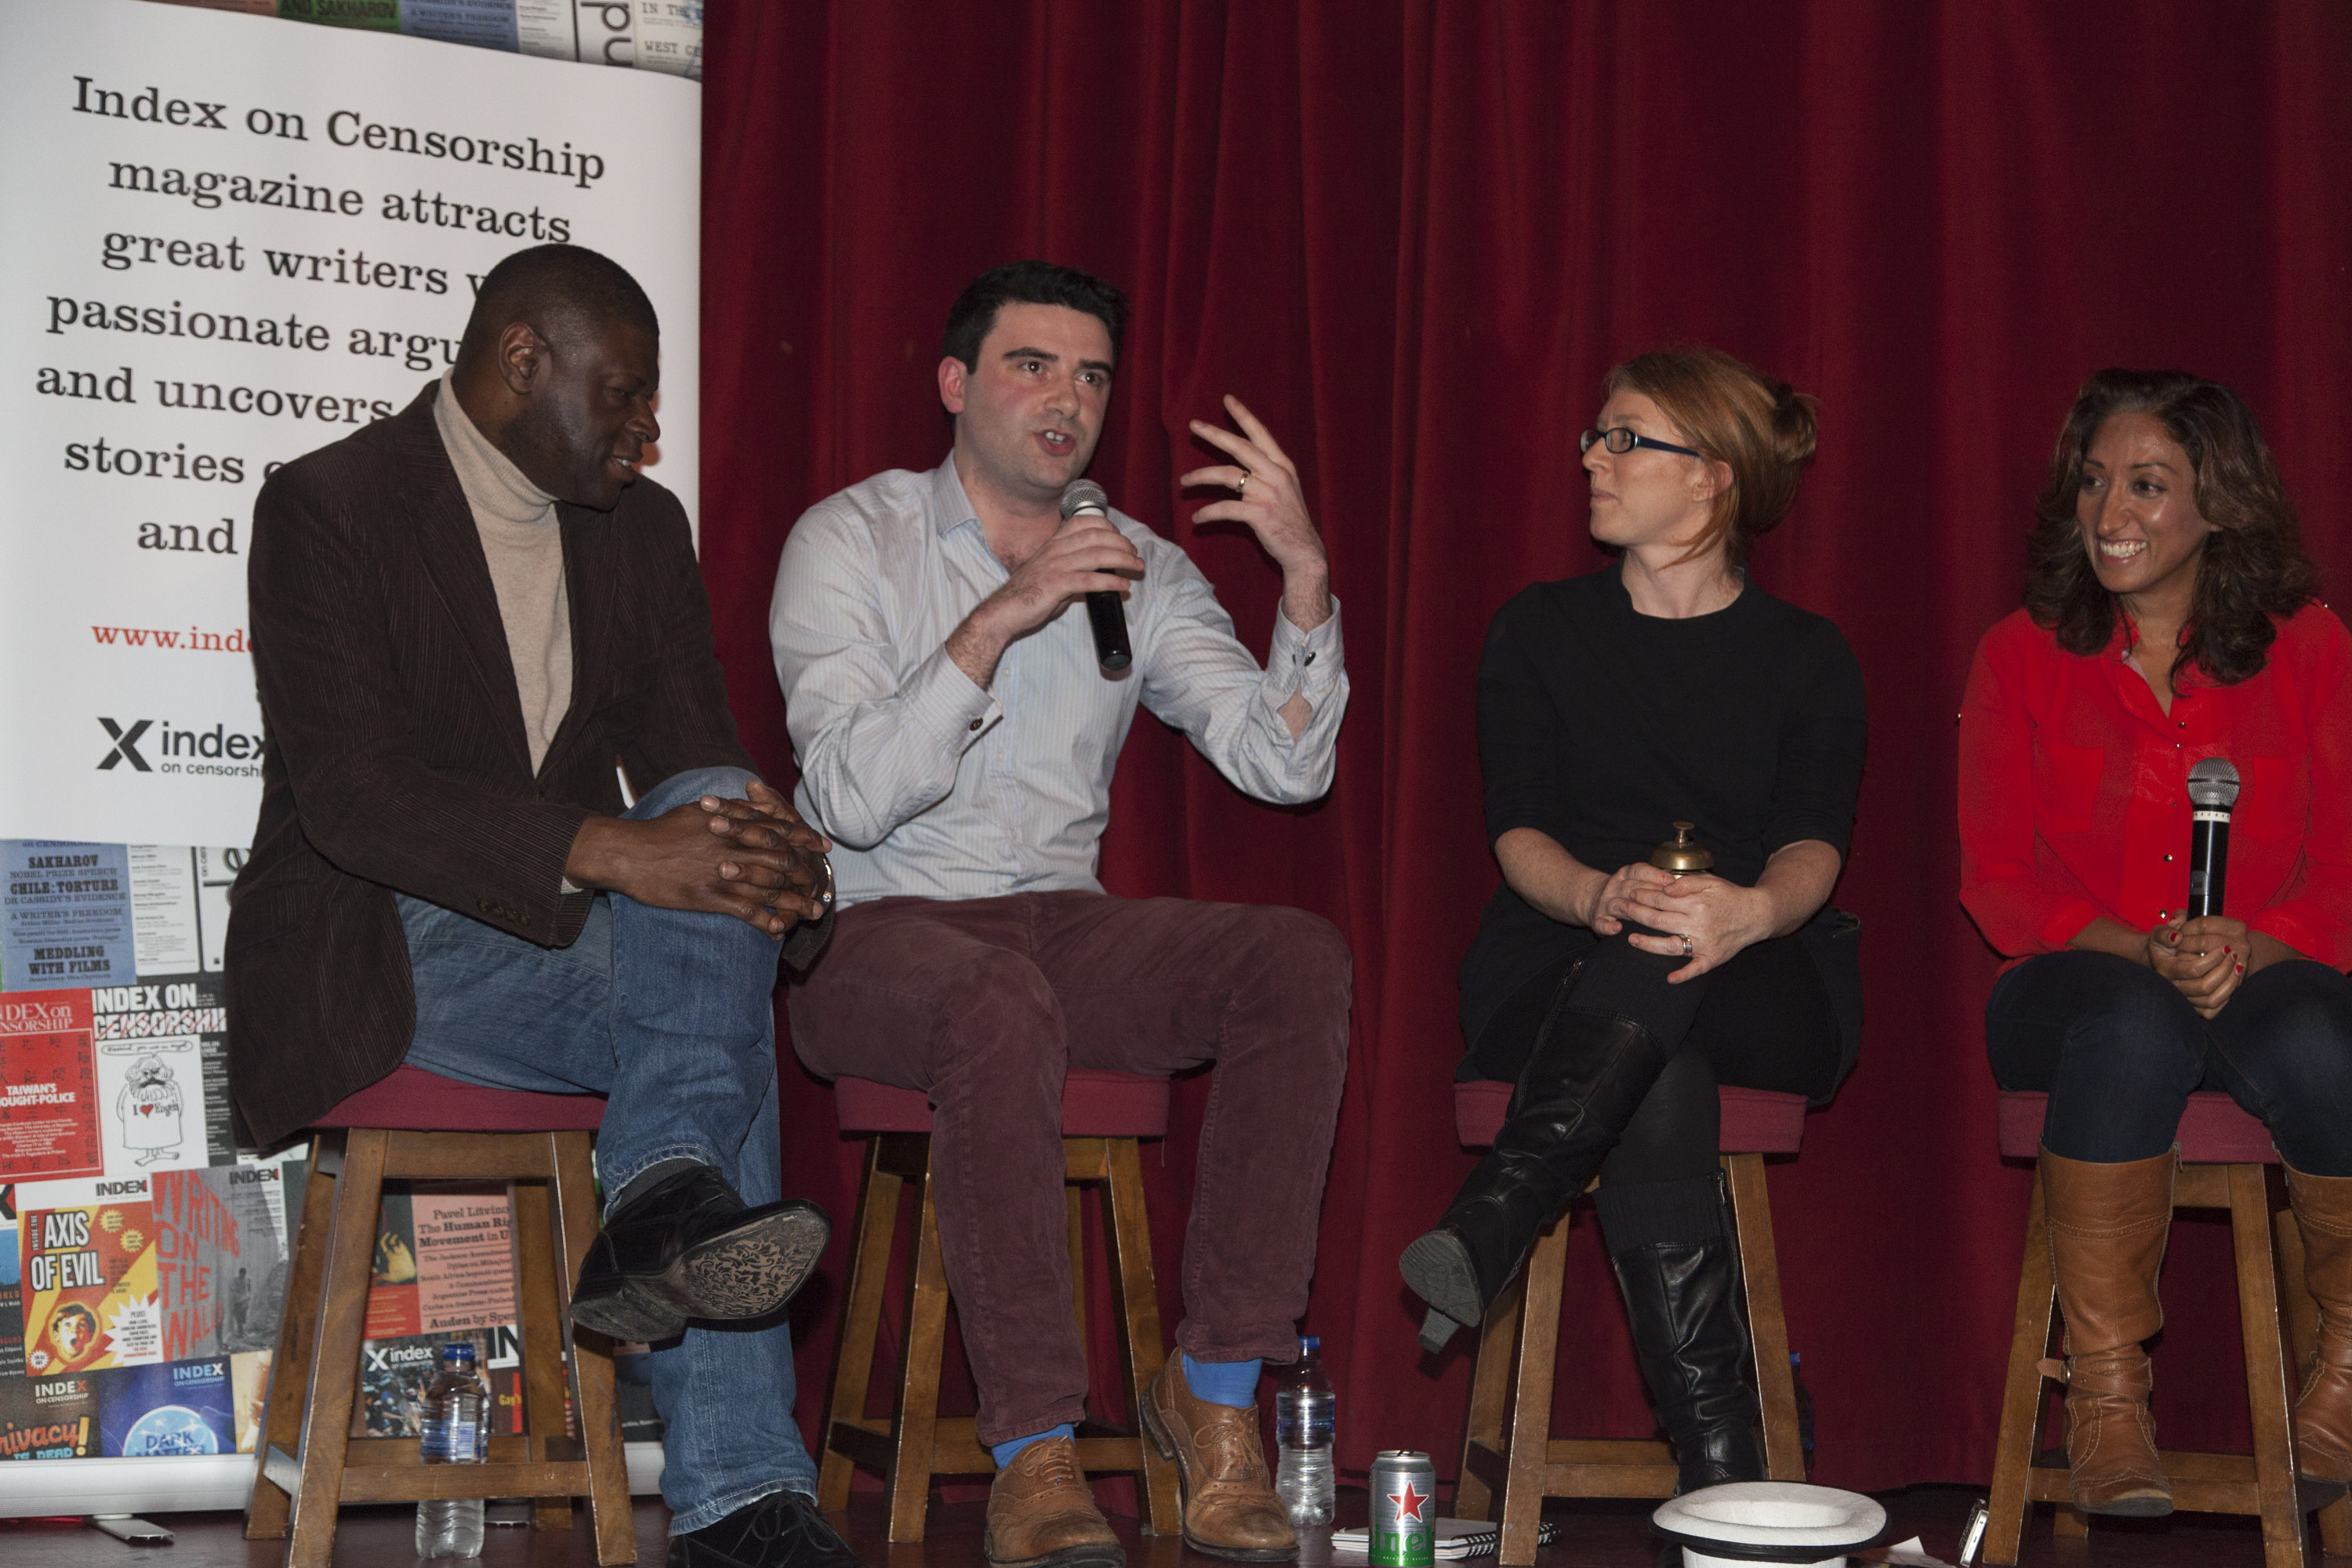 Kunle Olulode, Max Wind-Cowie, Jodie Ginsberg and Shazia Mirza at last nights debate (Photo: Sean Gallagher / Index on Censorship)